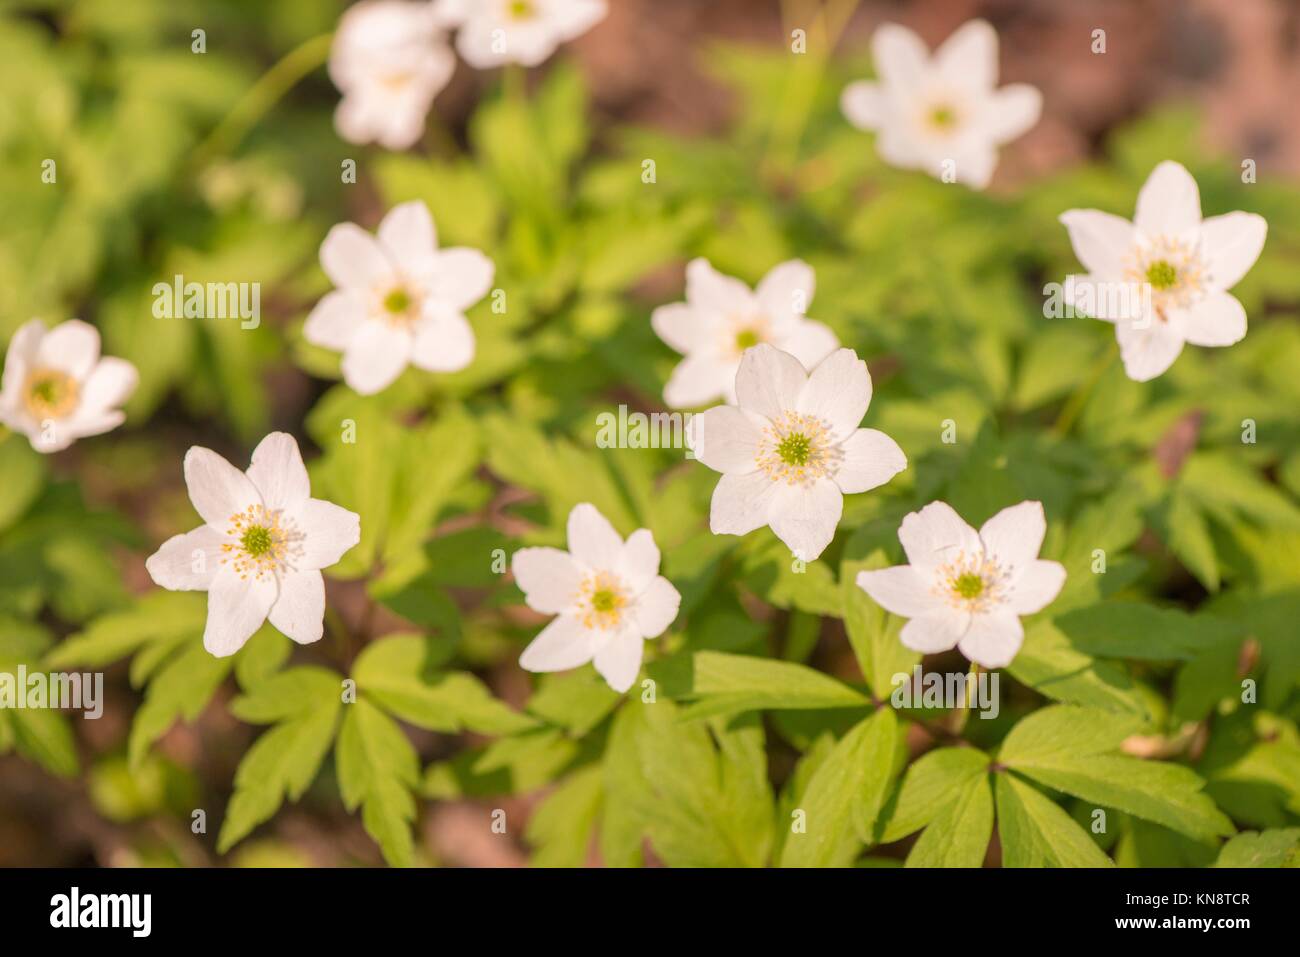 Wood anemones in forest, white springtime flowers. Close-up of nature detail. Concept of new life, wonders of nature, growth and vitality. Stock Photo